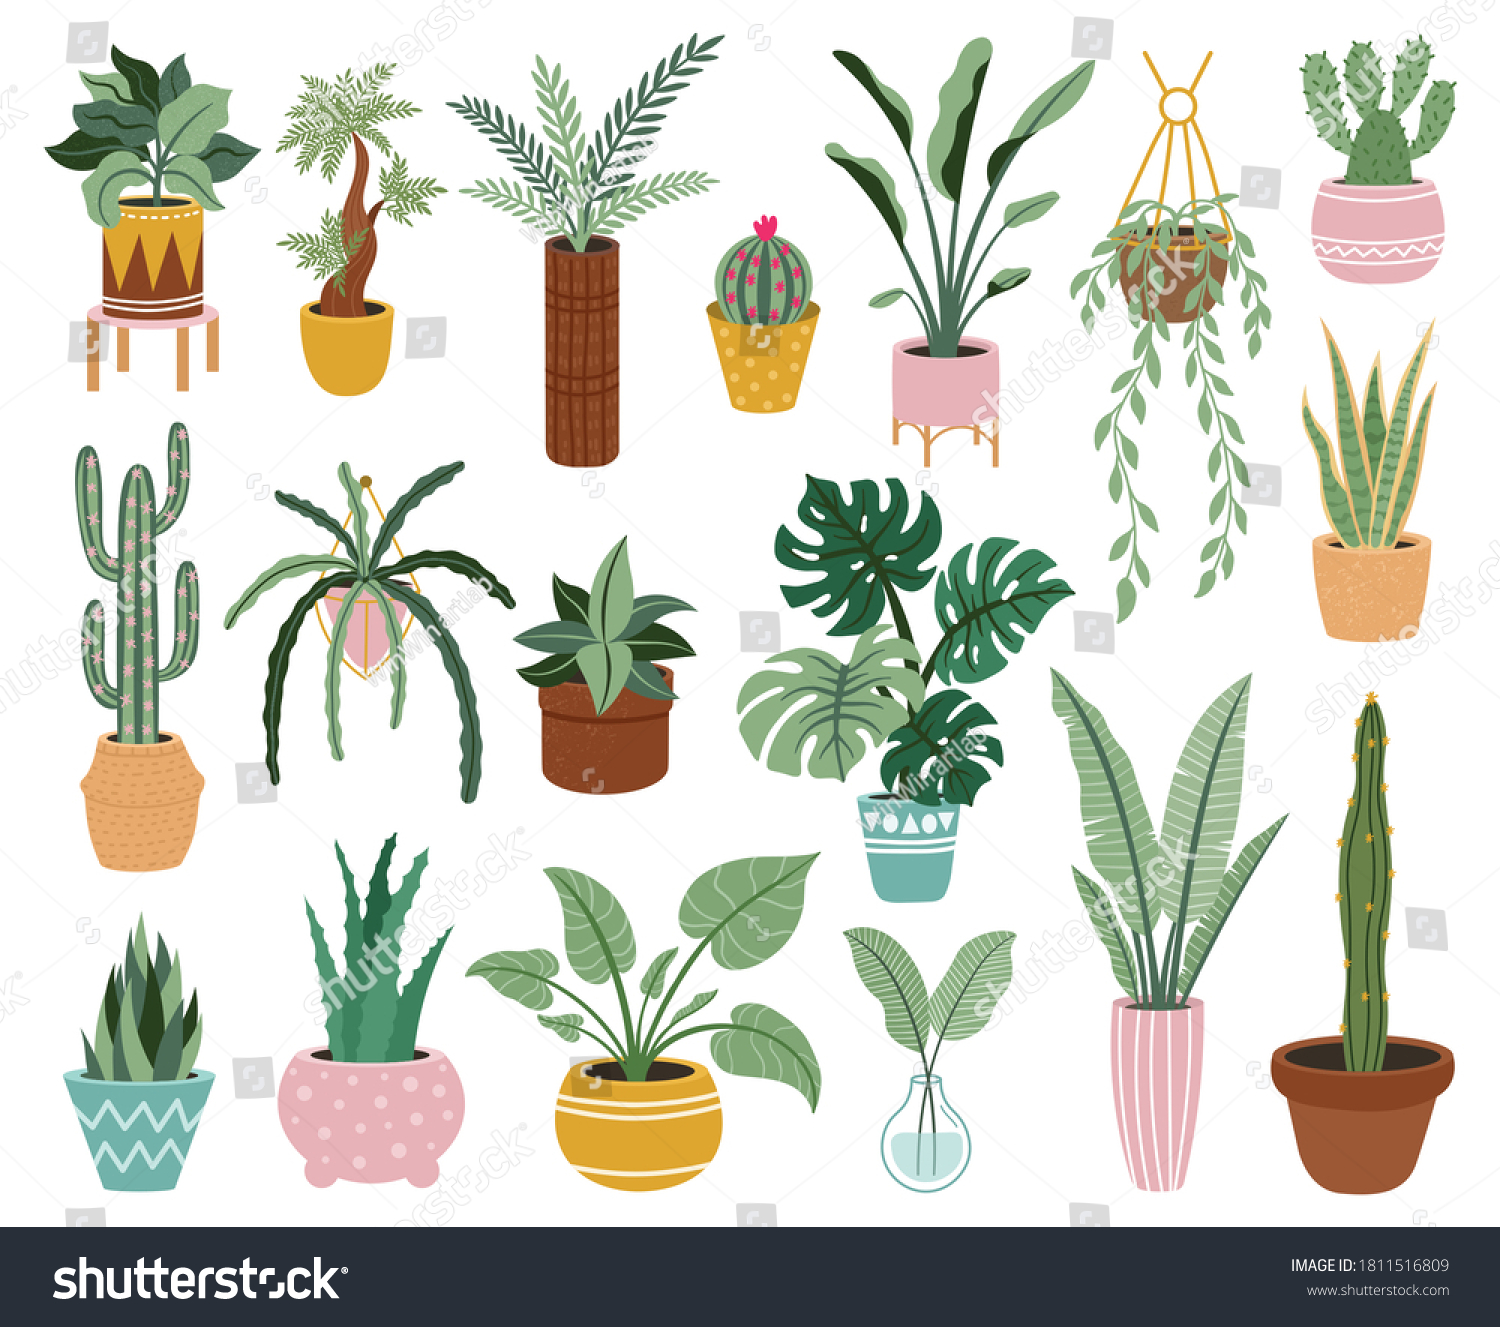 Home potted plants. Houseplants in plant pots, flower potted plant, green leaves interior decoration isolated vector illustration icons set. Ceramic containers and vase with aloe, cactus #1811516809